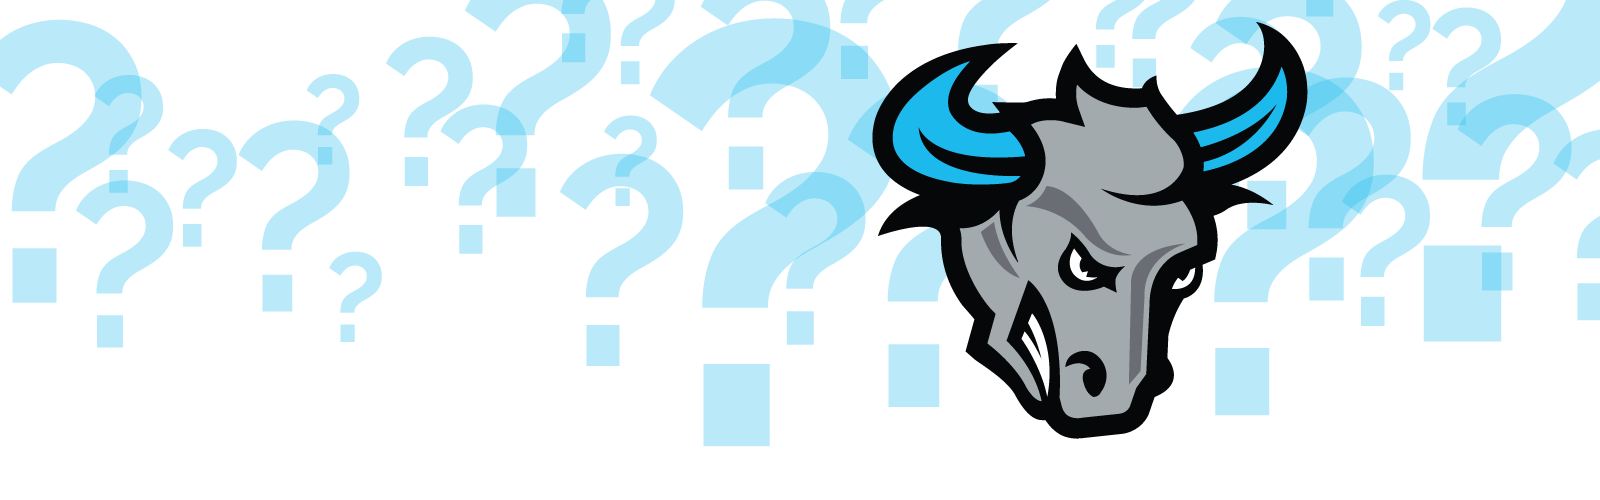 Crush bull on a background of question marks